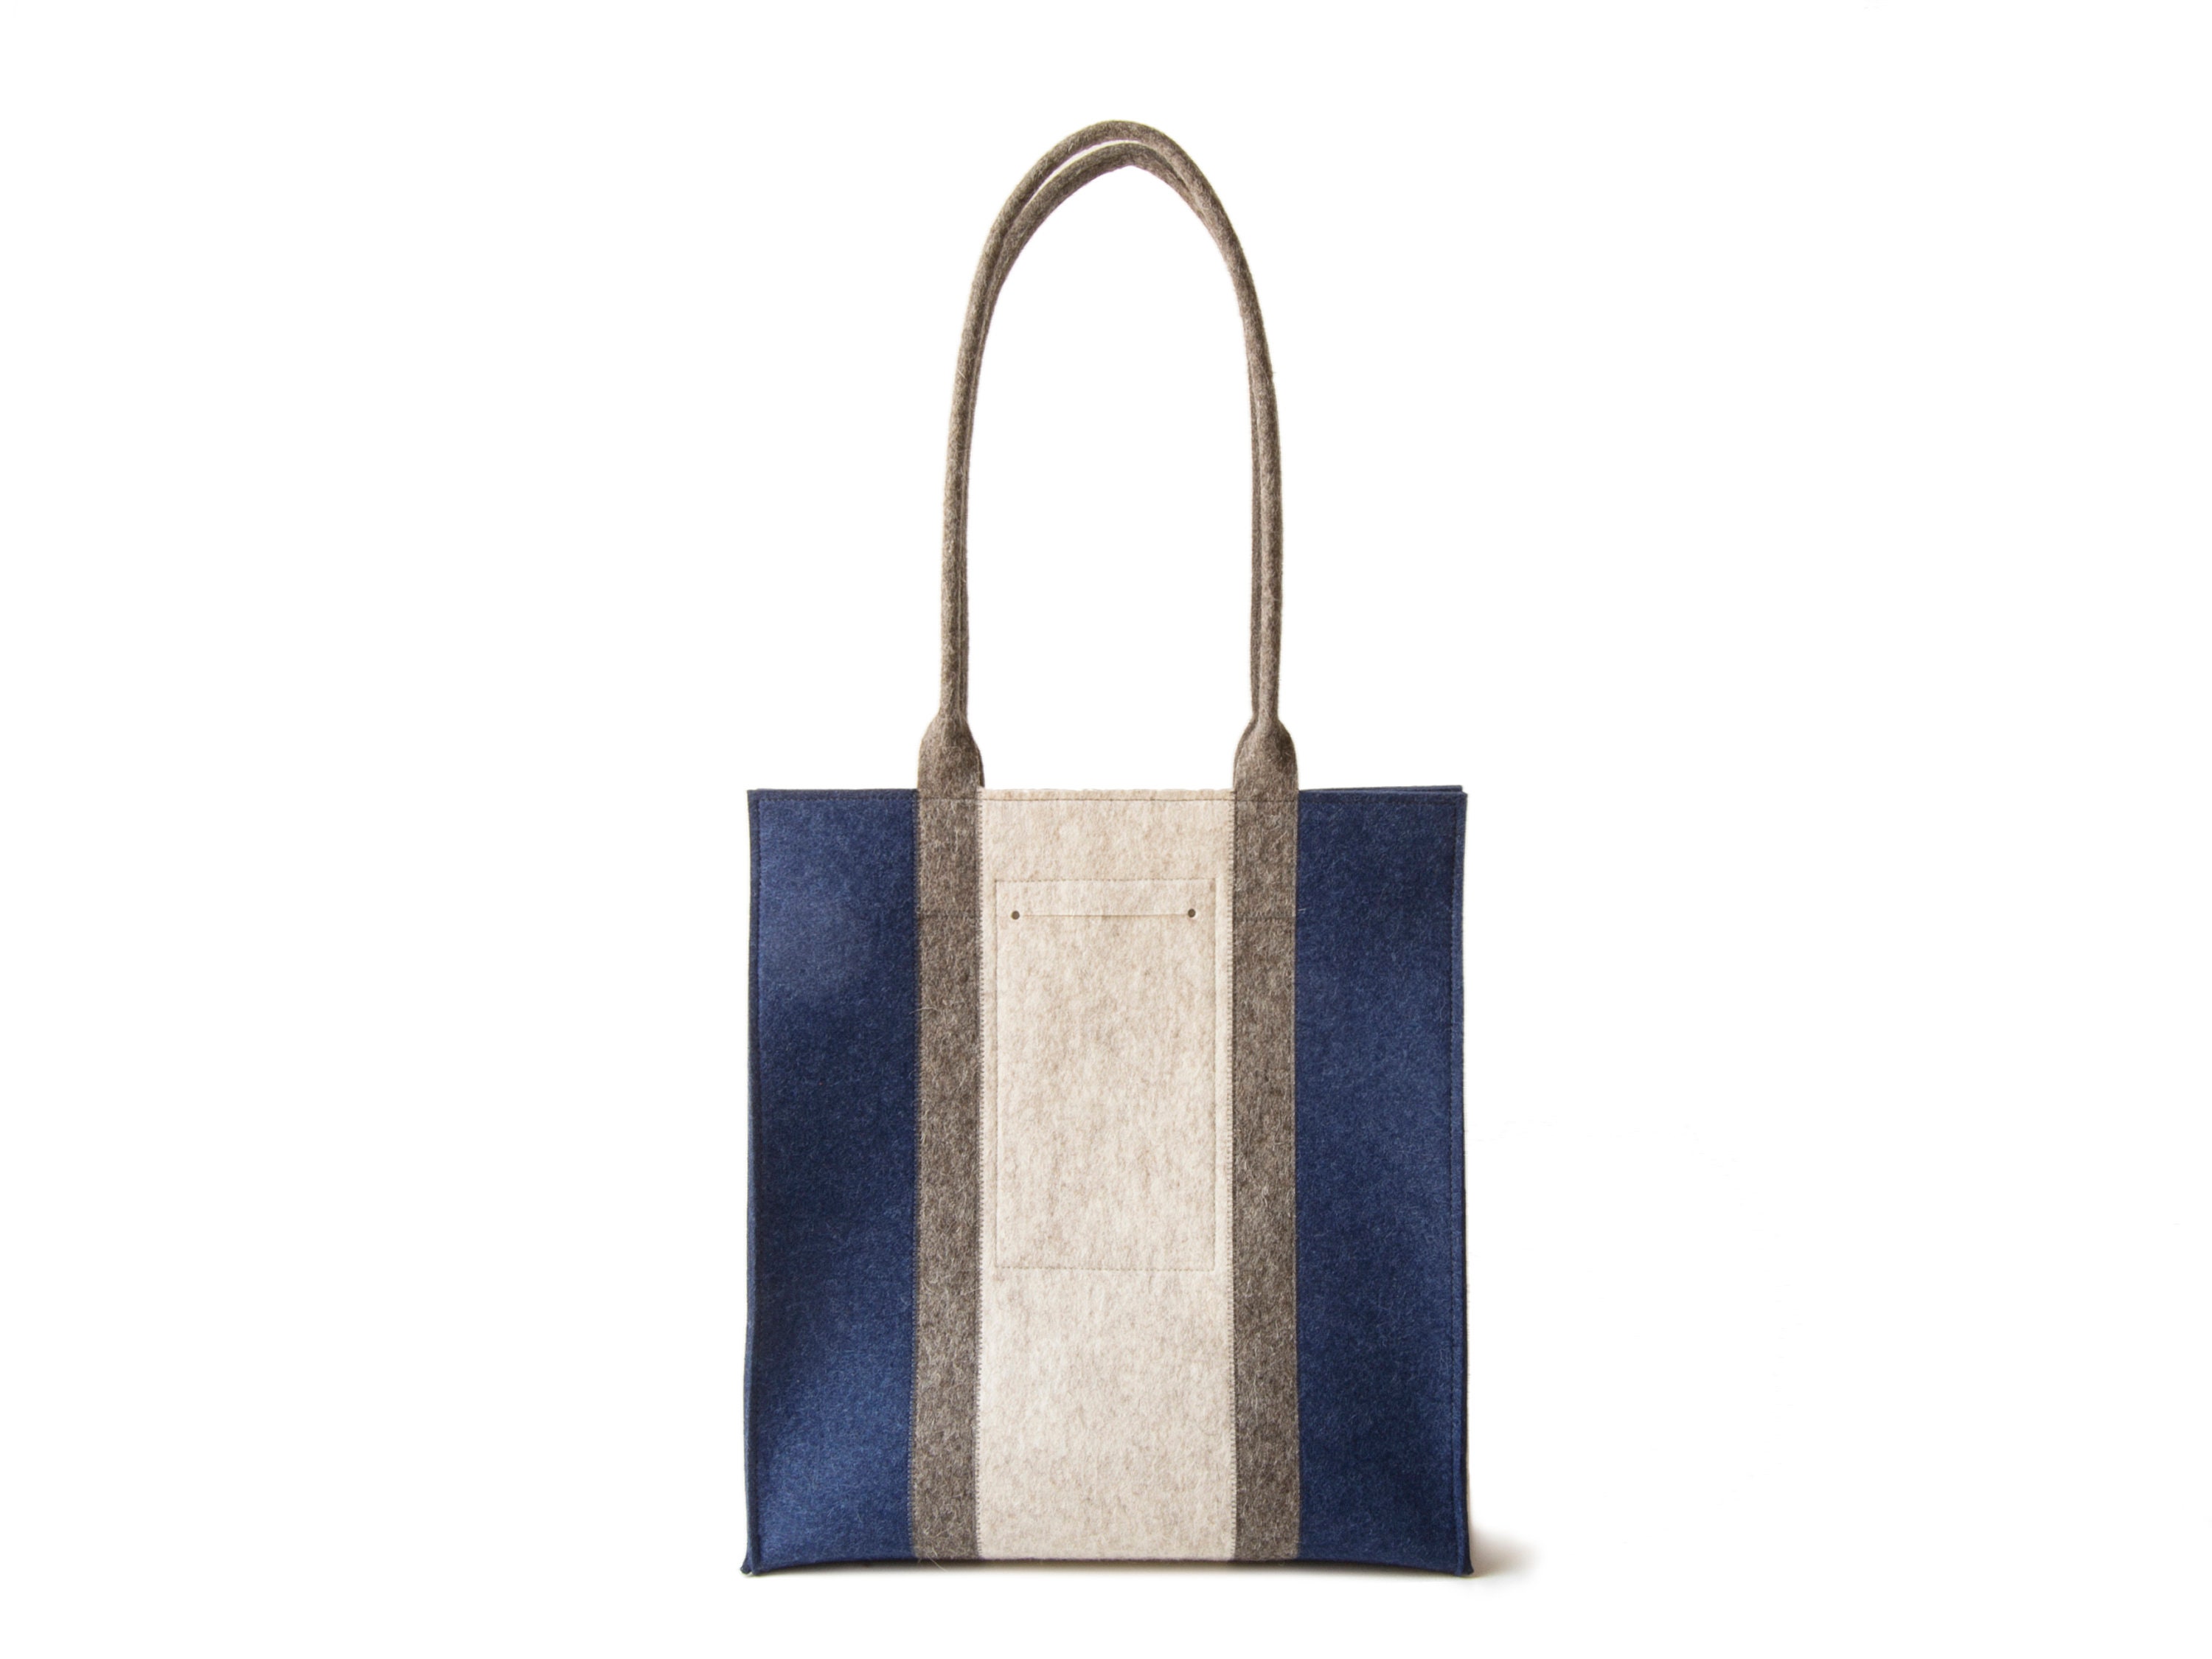 Wool Felt RECTANGULAR TOTE BAG - blue and gray - made in Italy